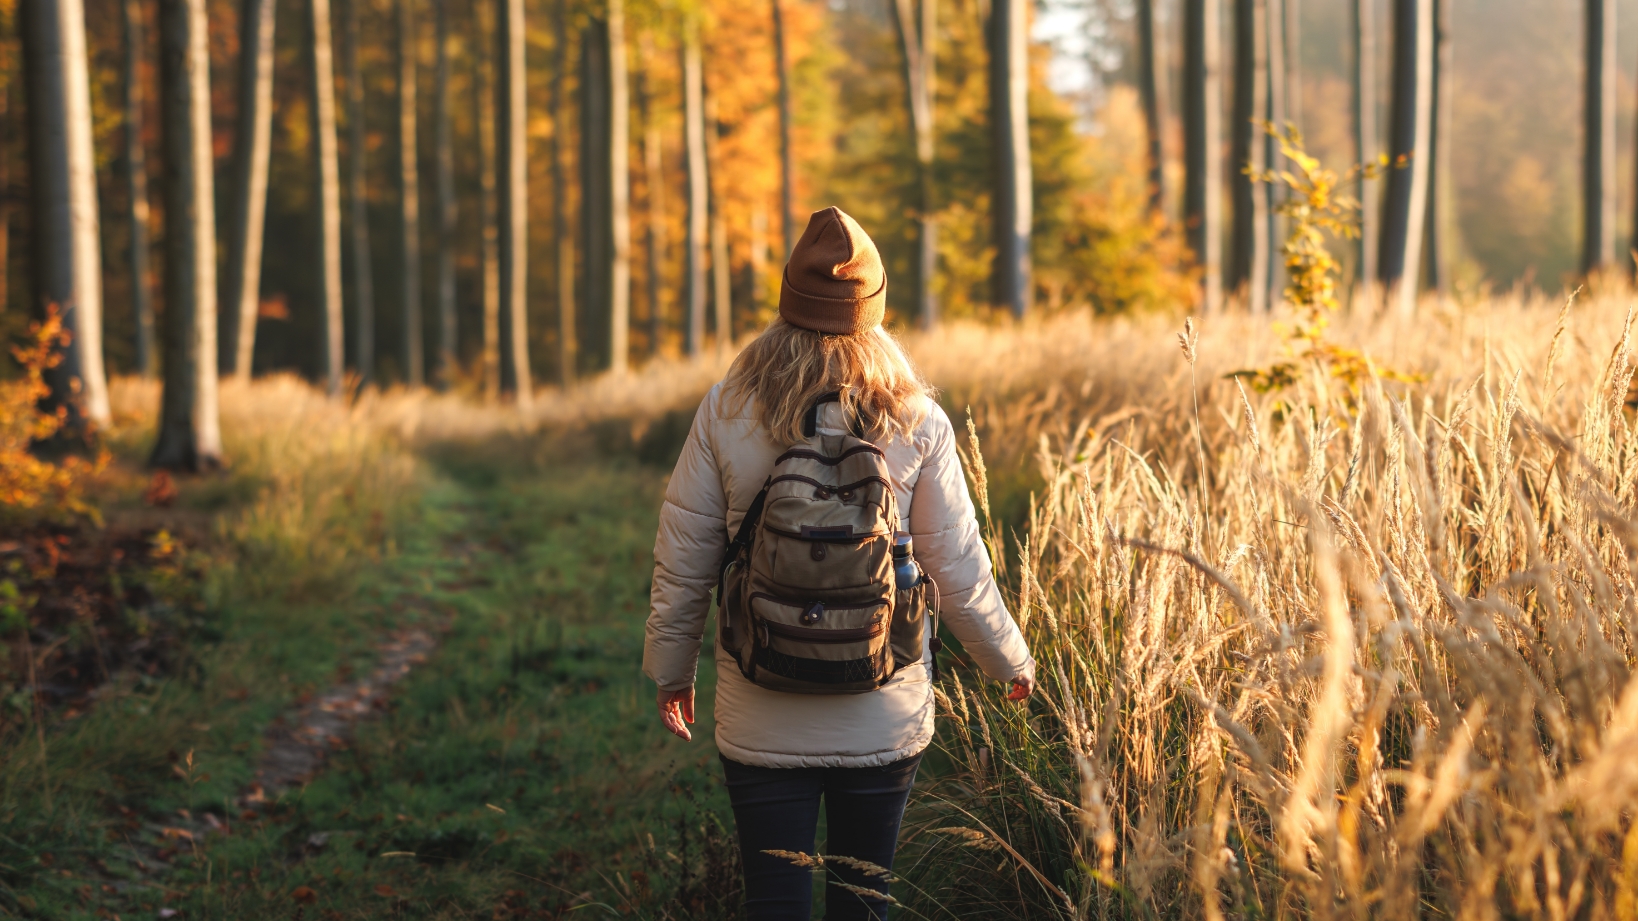 A woman walks along a wooded path in the fall.